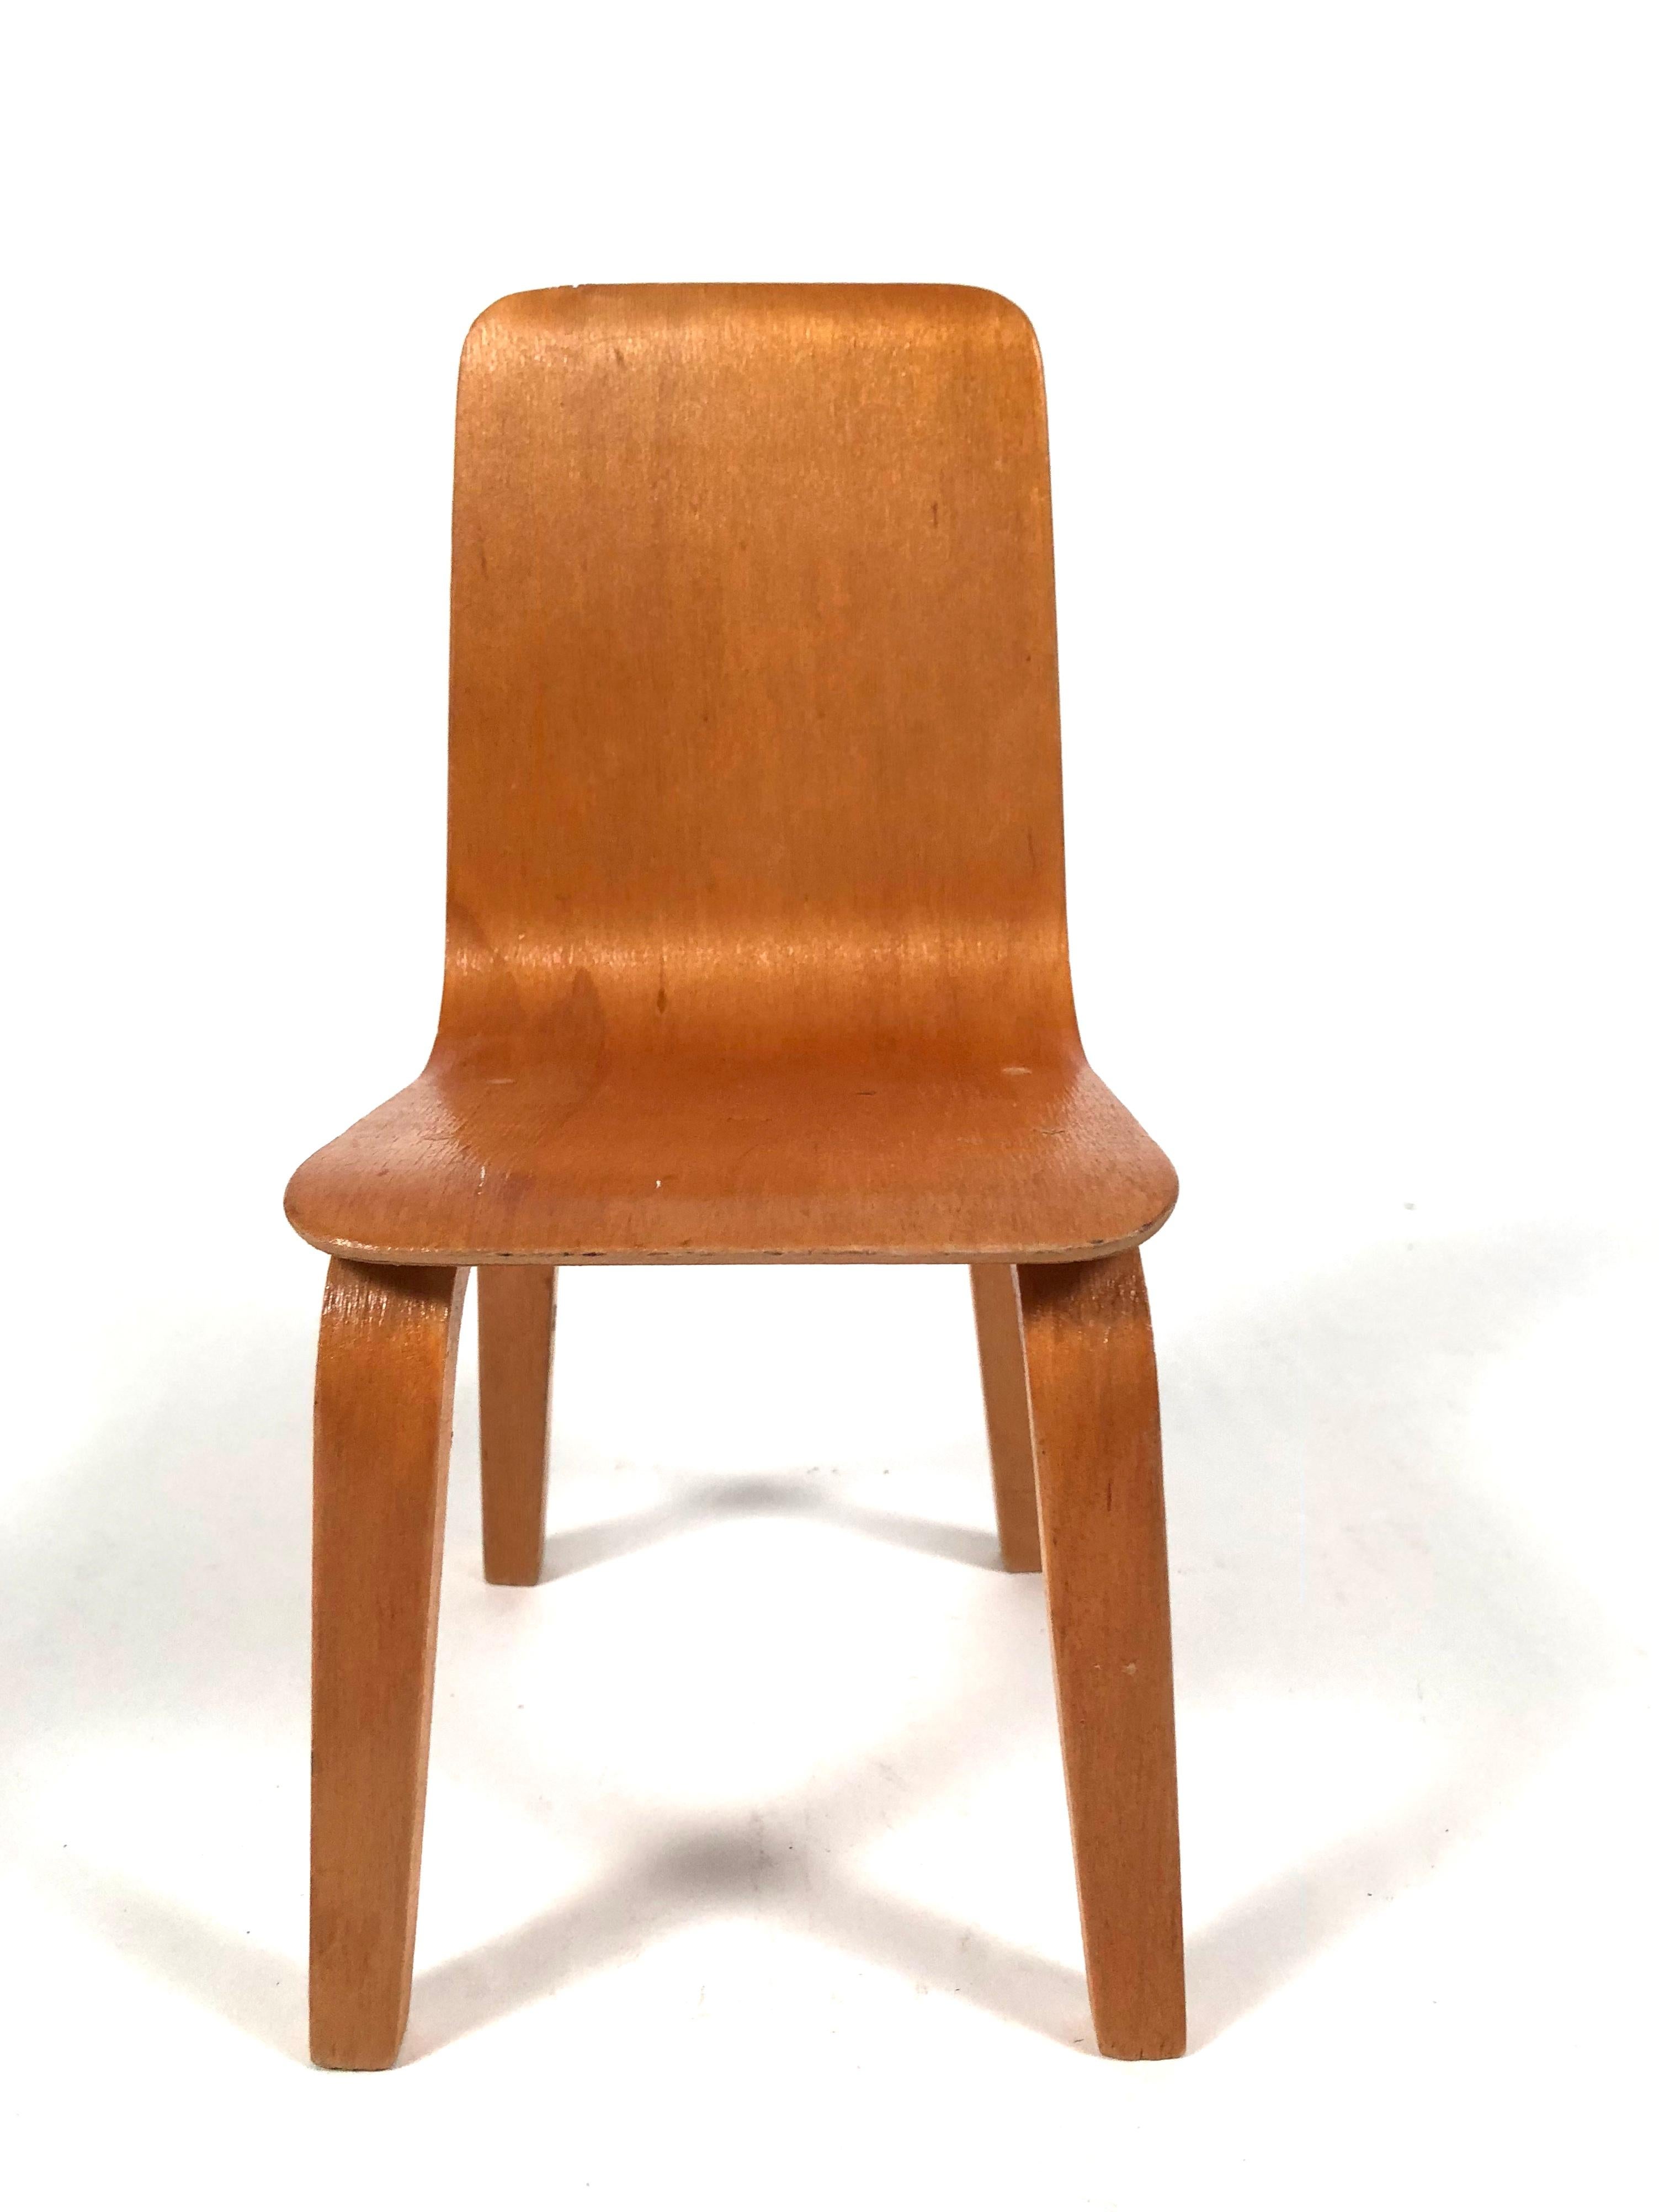 A Mid-Century Modern salesman's sample model of a Russian-made bentwood chair in birch, the continuous curved back and seat supported by two curved bentwood legs, retaining its original printed label on the bottom.
The design of this chair is